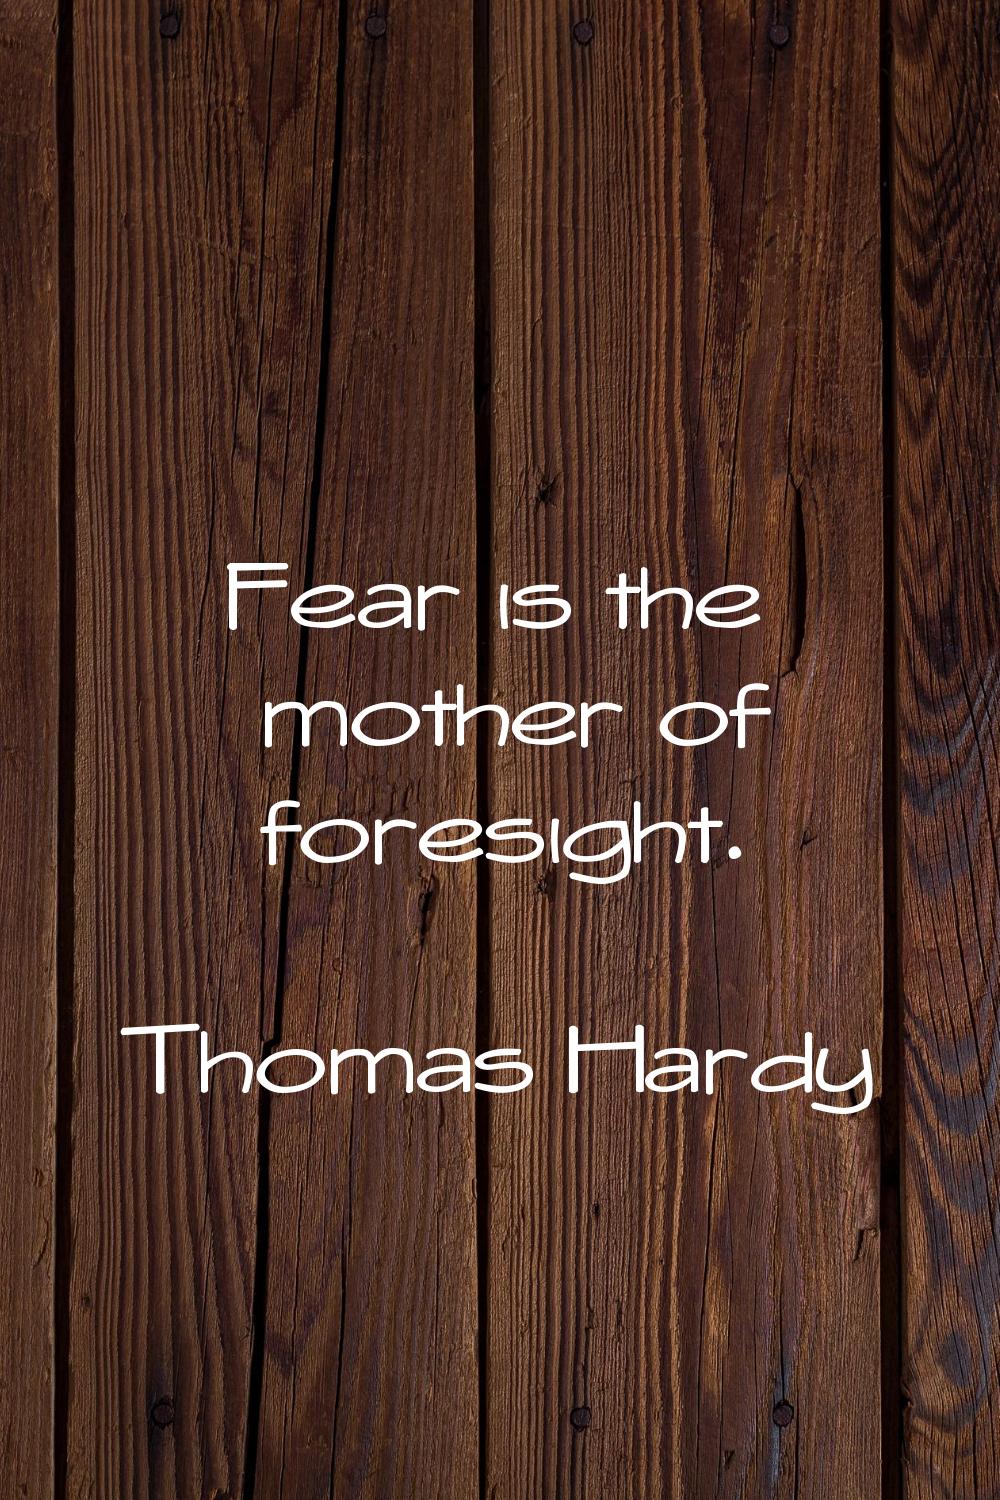 Fear is the mother of foresight.